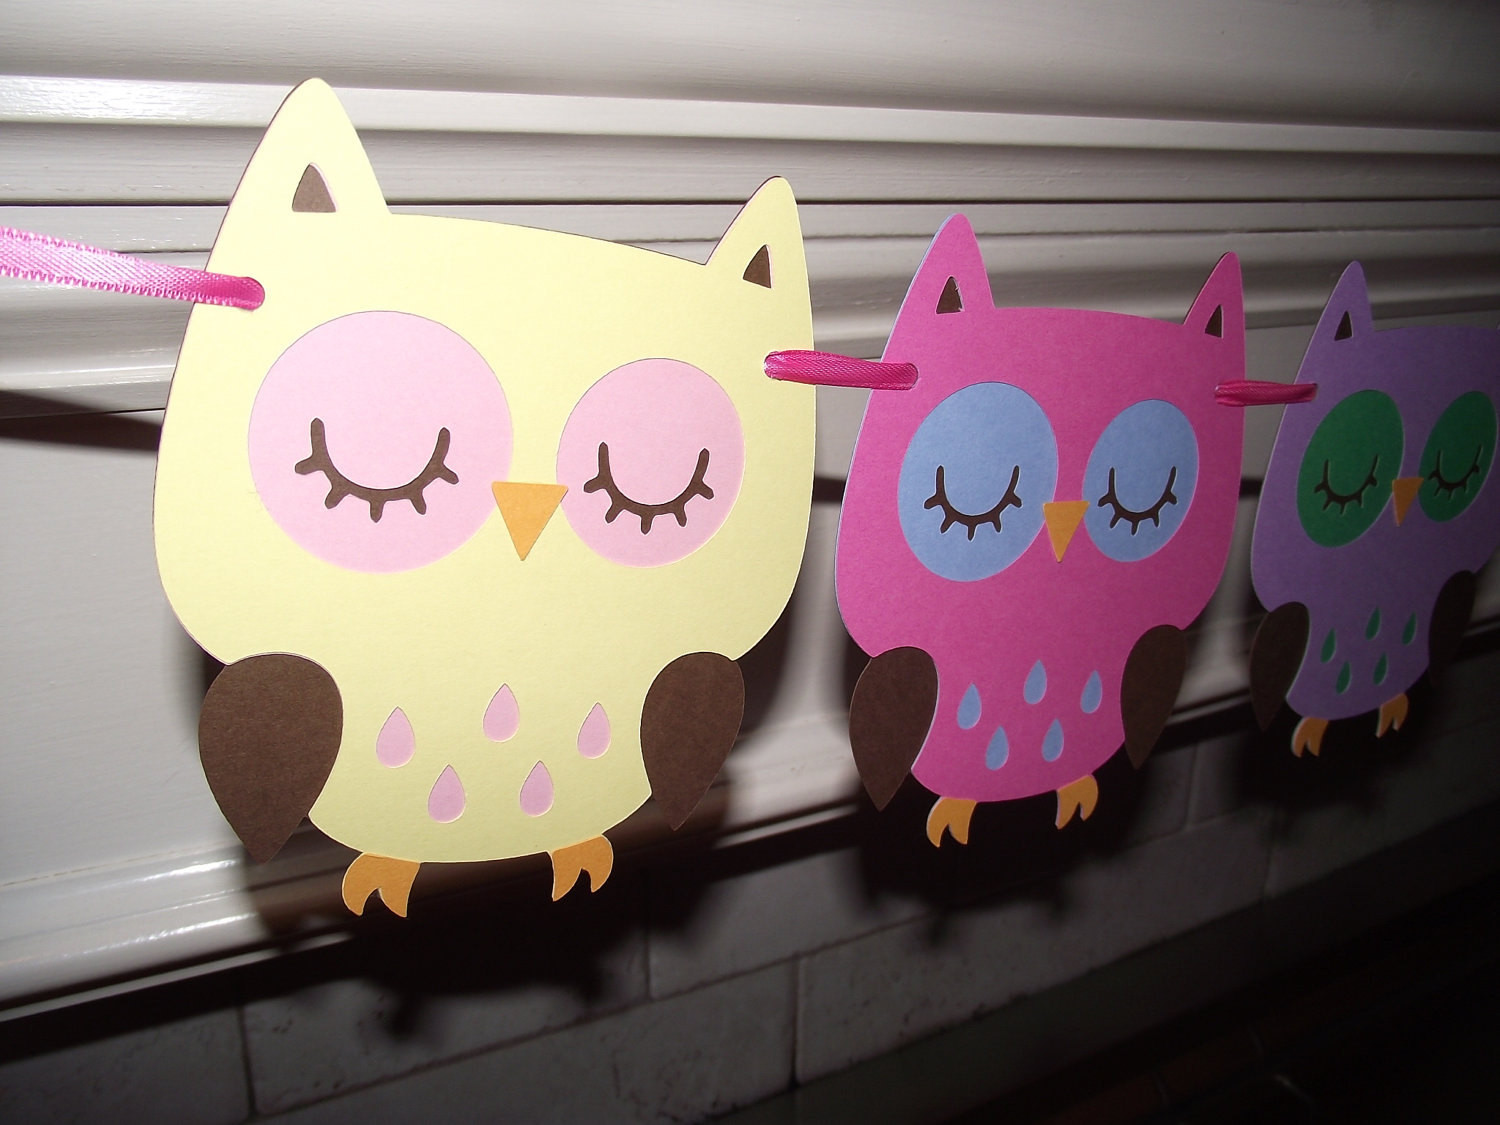 Owl Baby Shower Decor
 Owl Decorations For Baby Shower